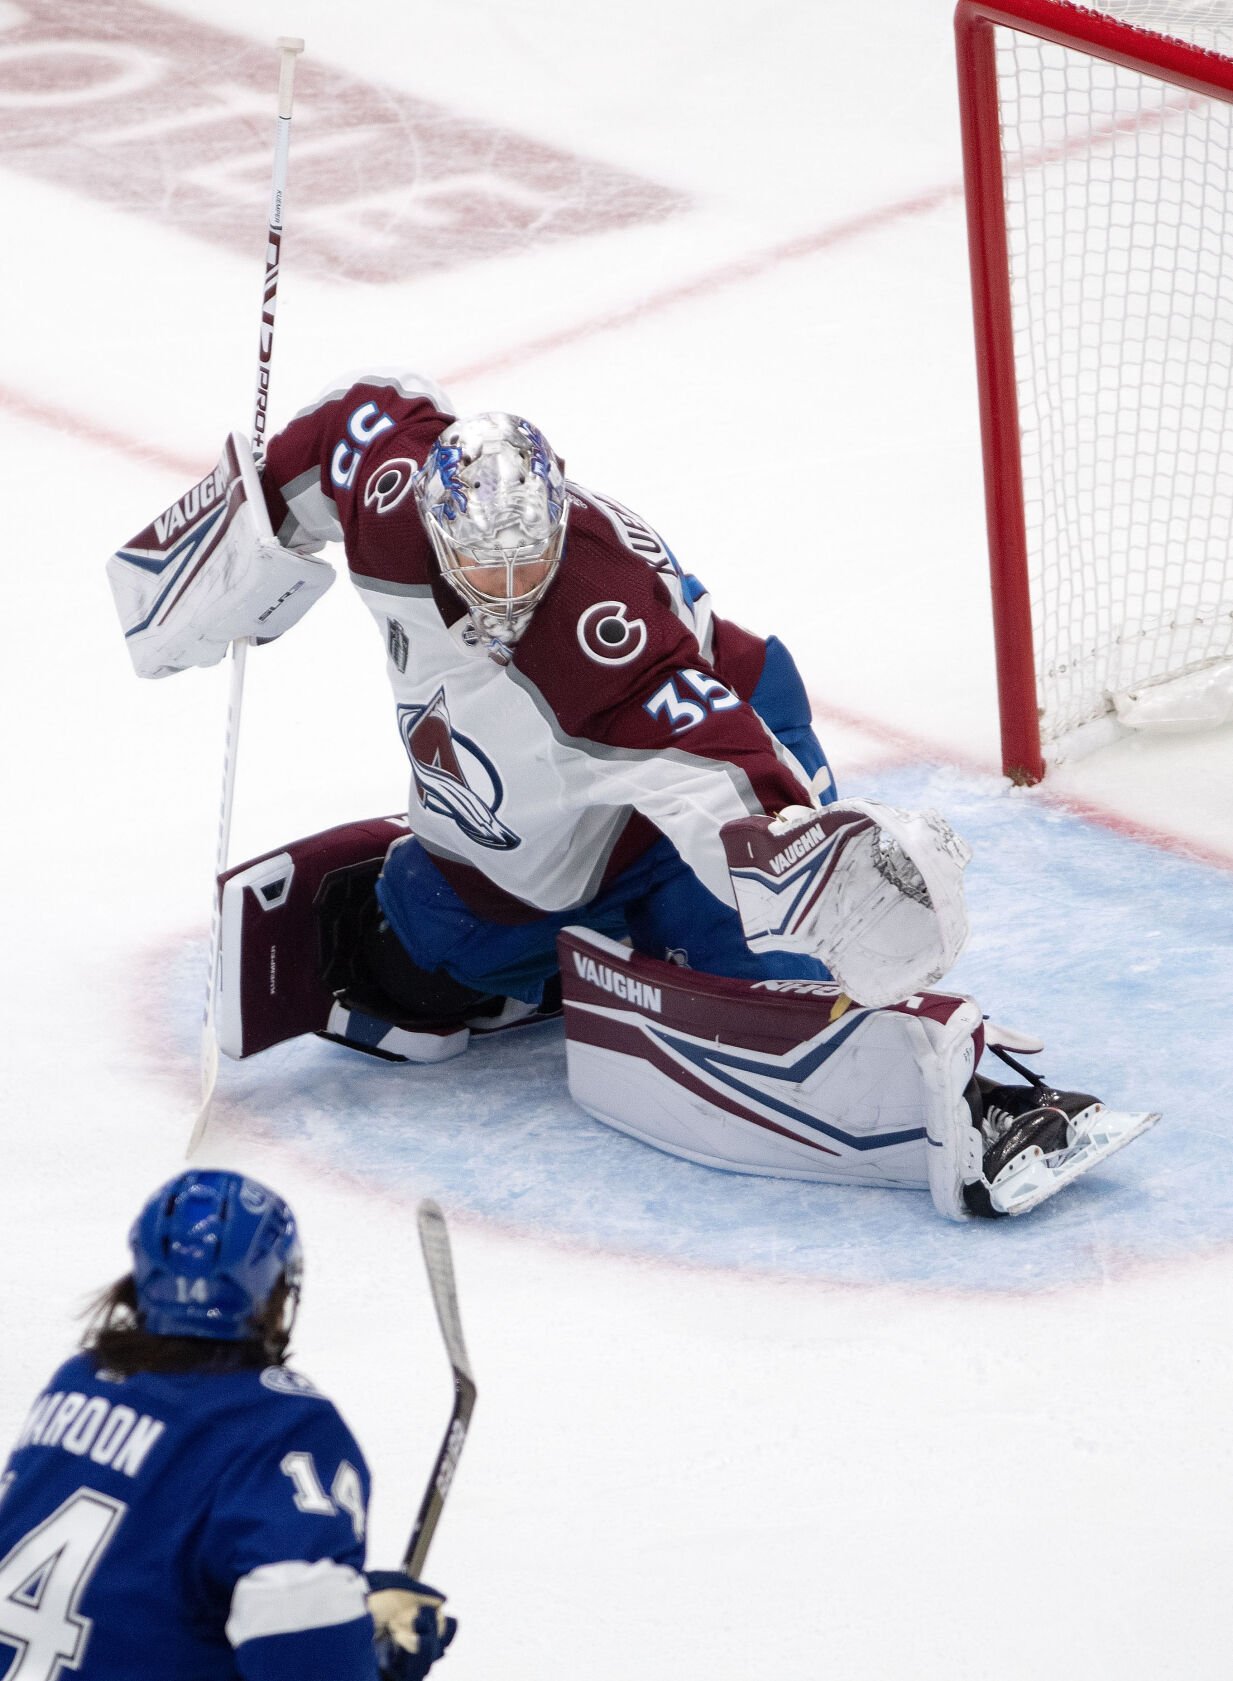 Avs goalie Darcy Kuemper leaves game after stick hits face